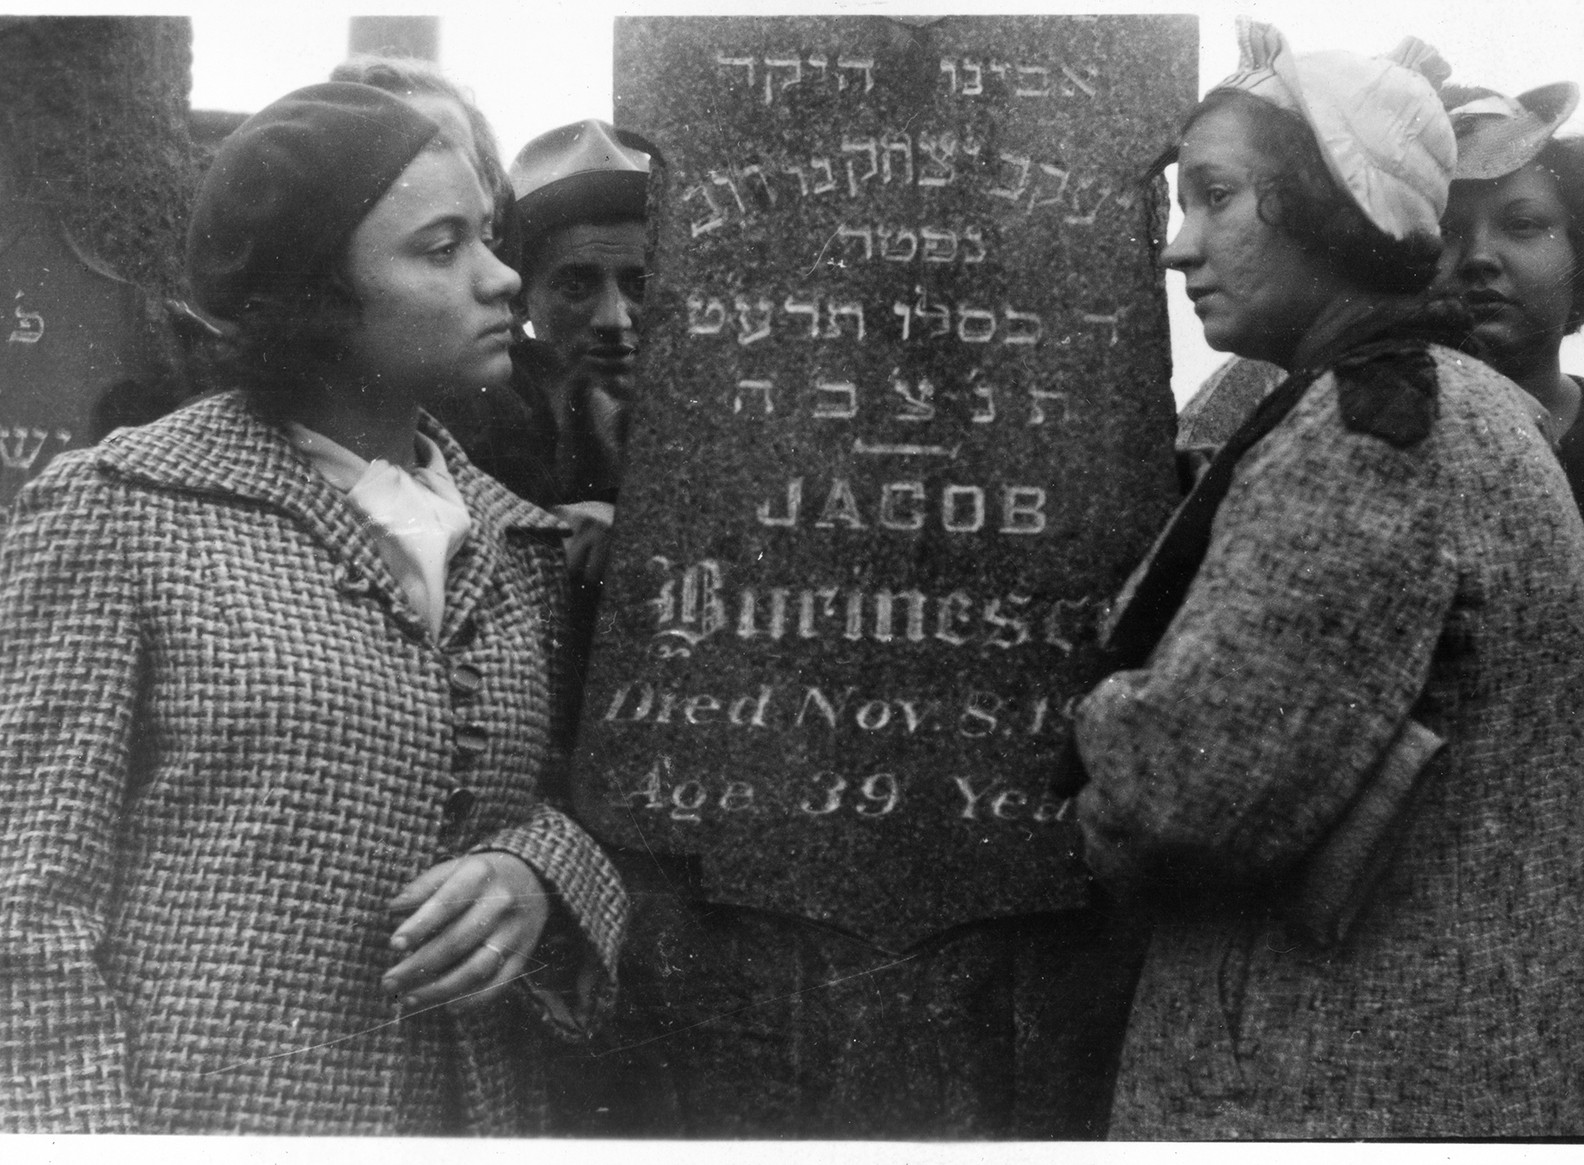 Black and white photo of Jacob Burinescu's family standing on either side of his tombstone